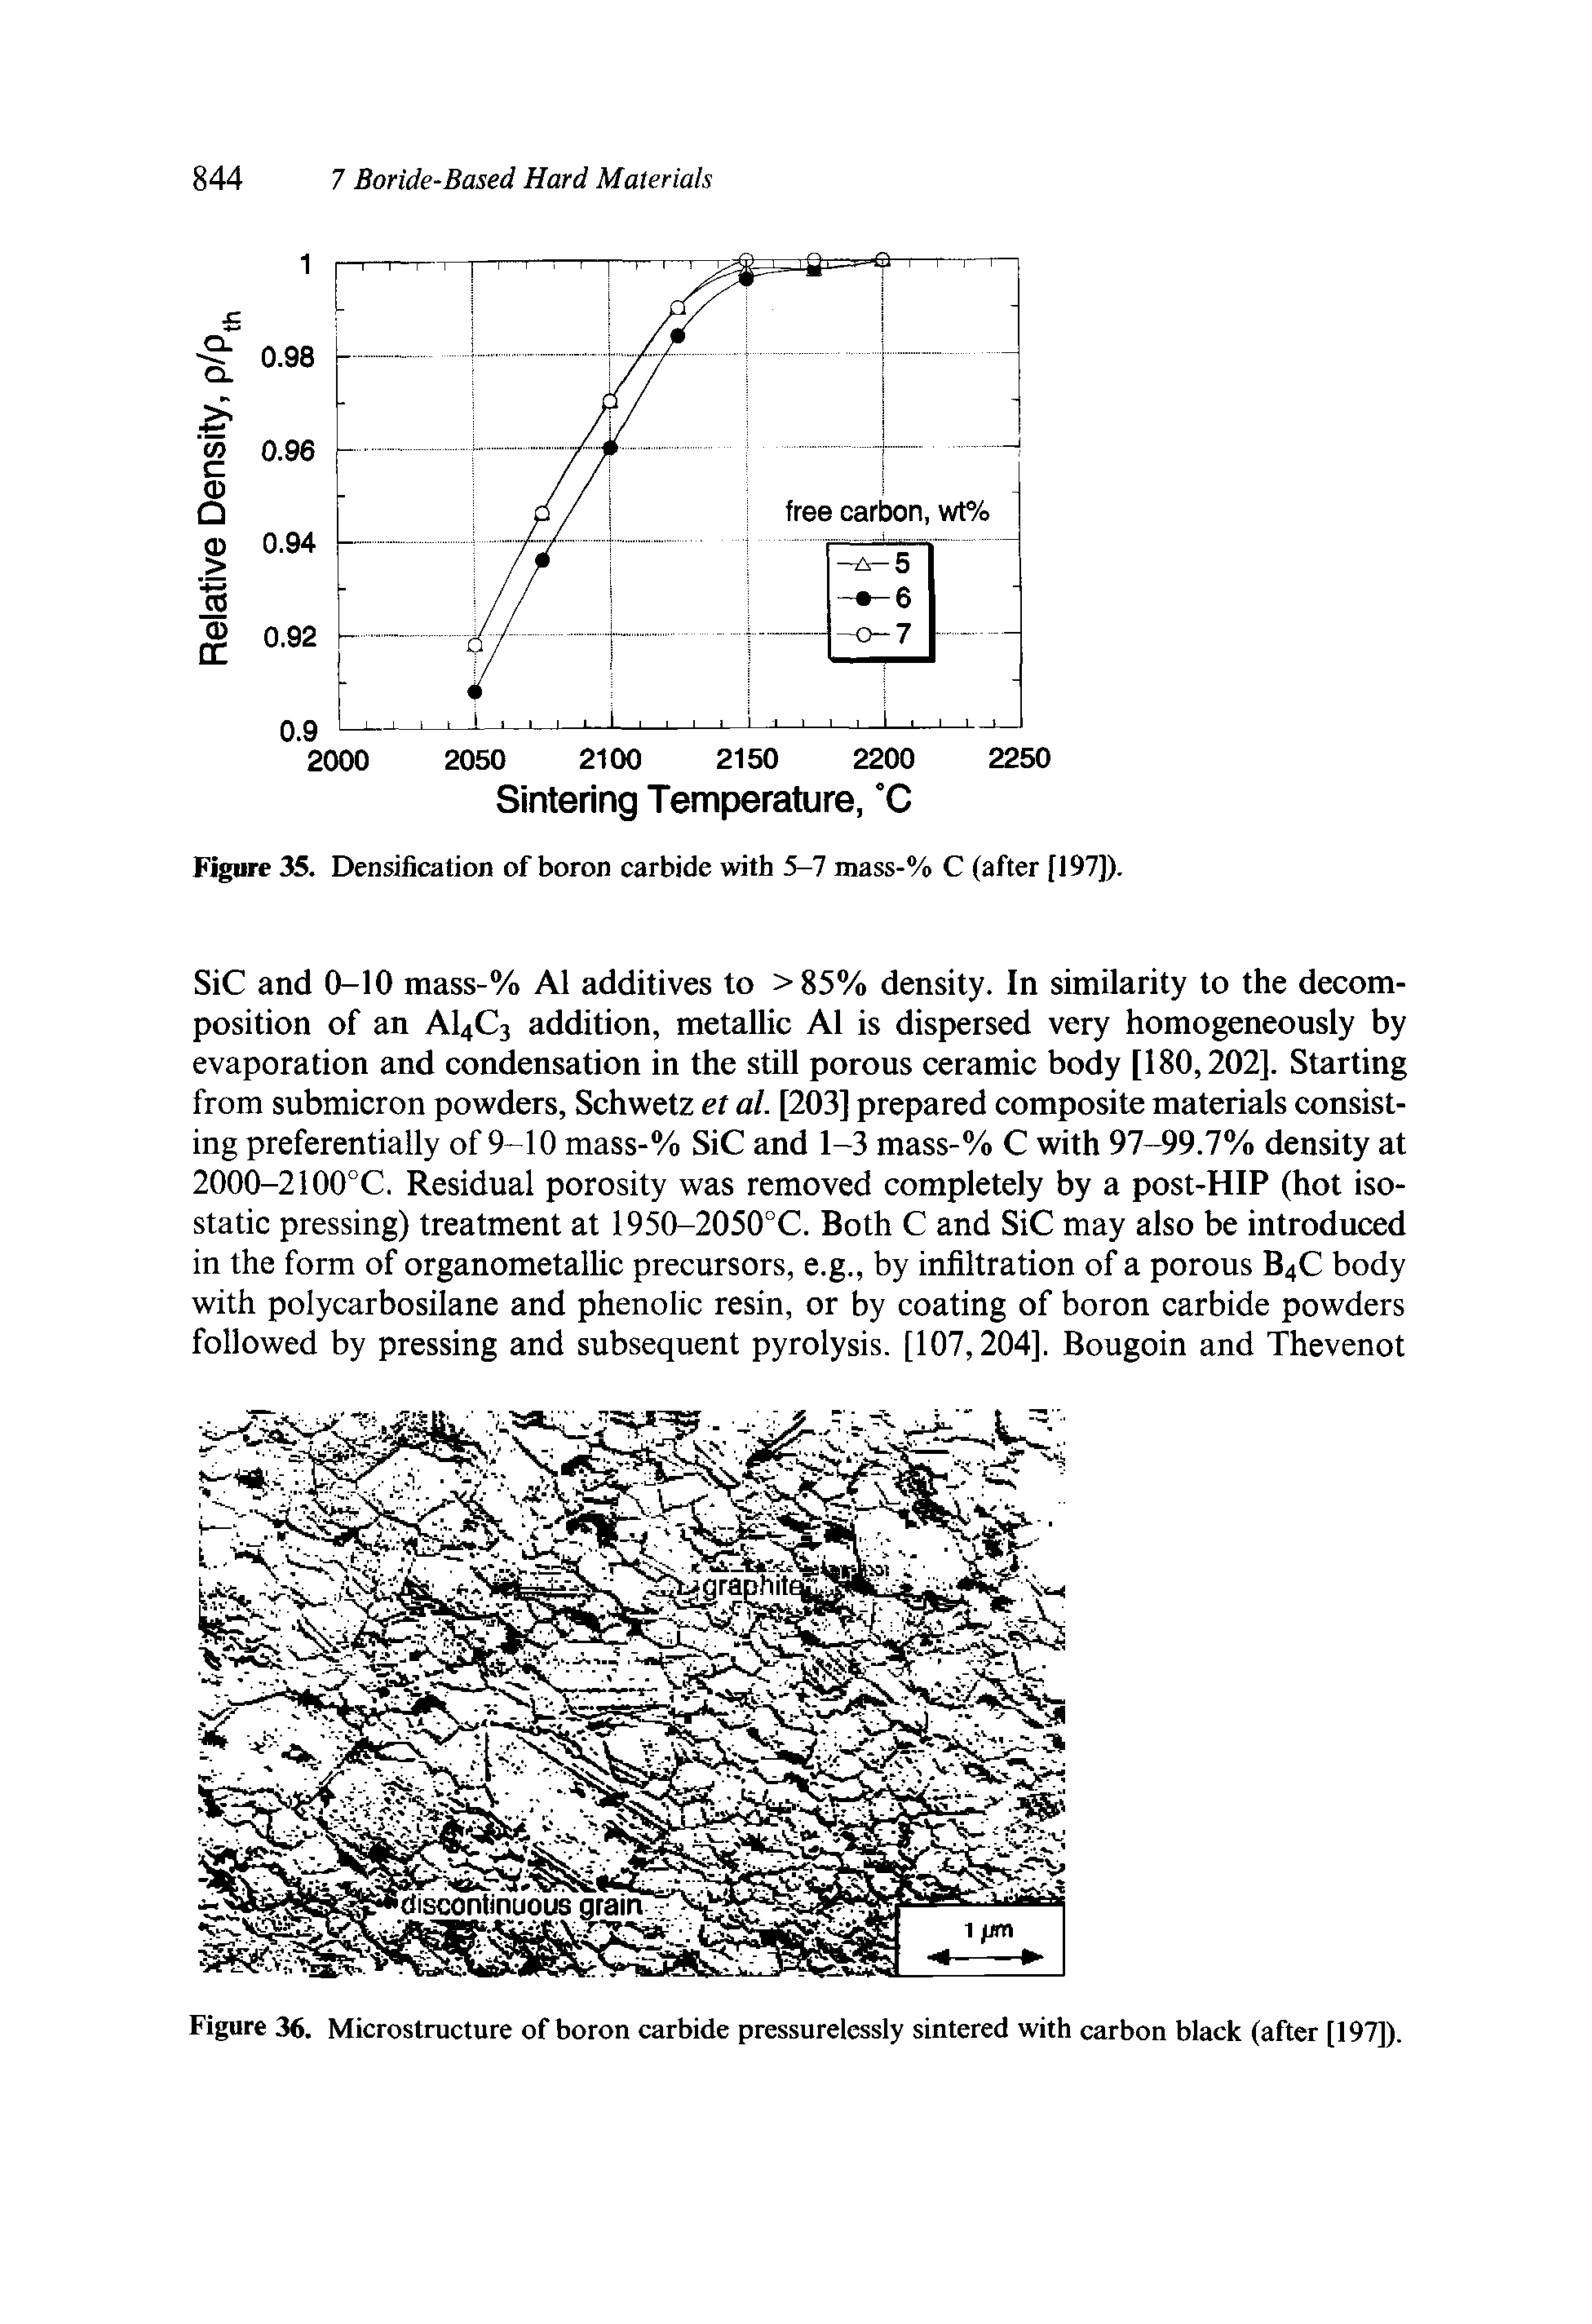 Figure 36. Microstructure of boron carbide pressurelessly sintered with carbon black (after [197]).